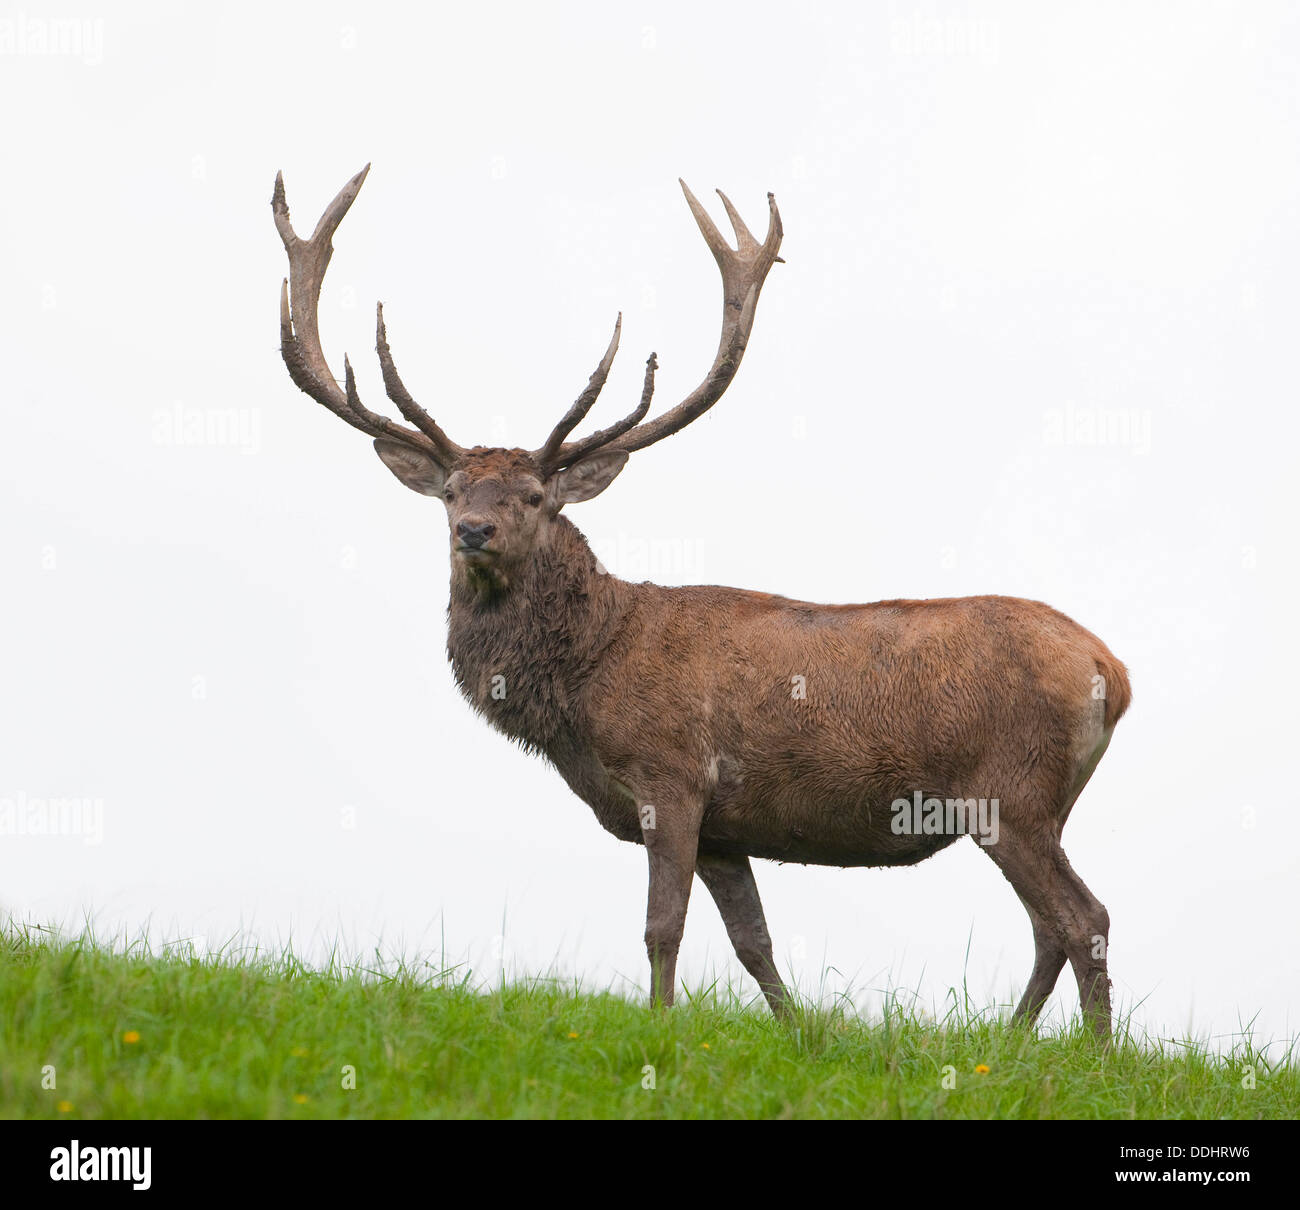 Stag (Cervus elaphus) standing on a meadow, captive Stock Photo